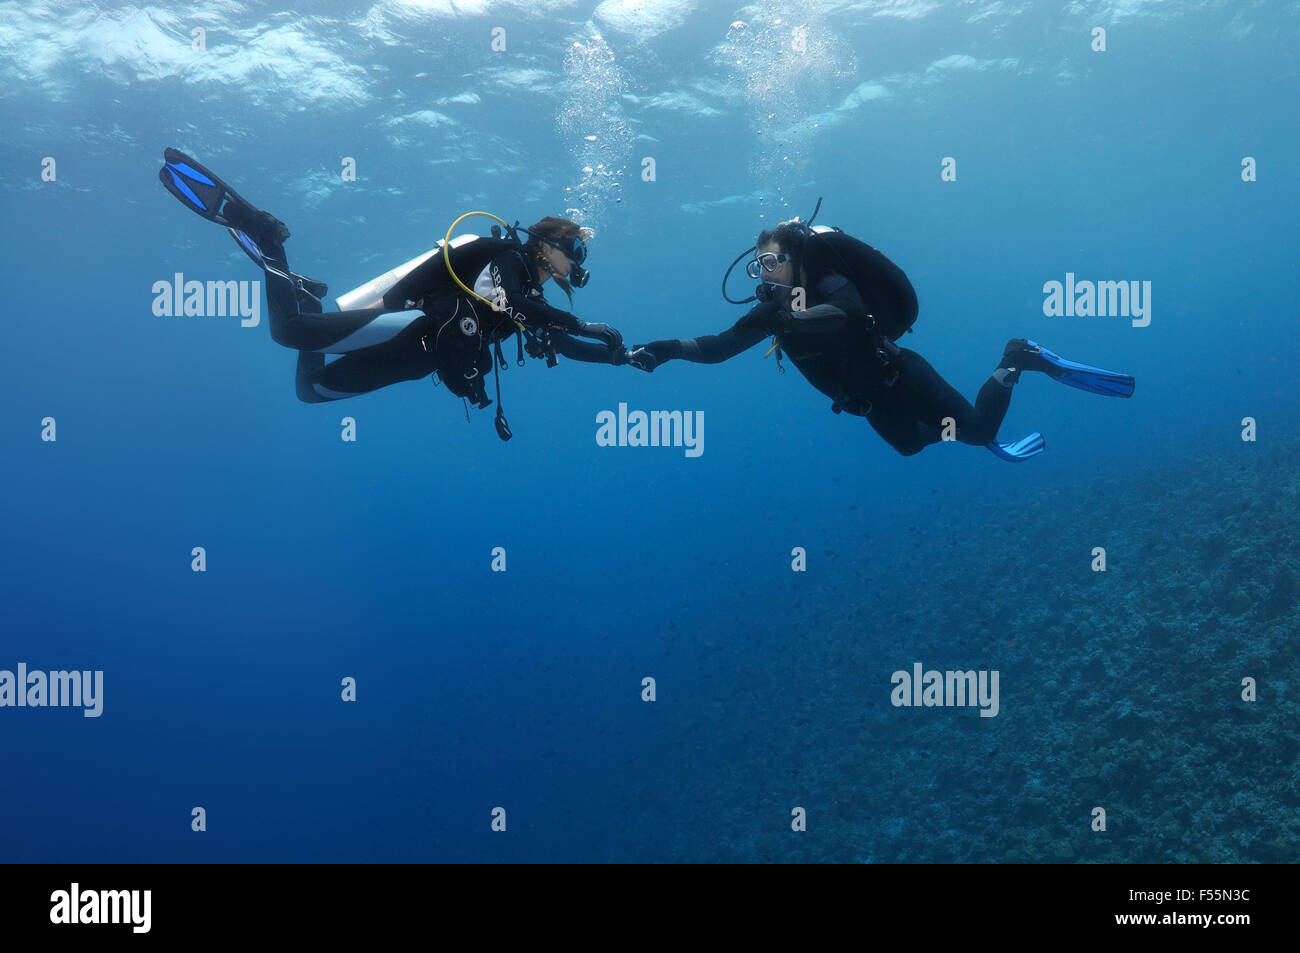 Sept. 26, 2015 - Indian Ocean, Maldives - Young couple hanging divers in the water, stare at each other holding hands, Indian Ocean, Maldives (Credit Image: © Andrey Nekrasov/ZUMA Wire/ZUMAPRESS.com) Stock Photo